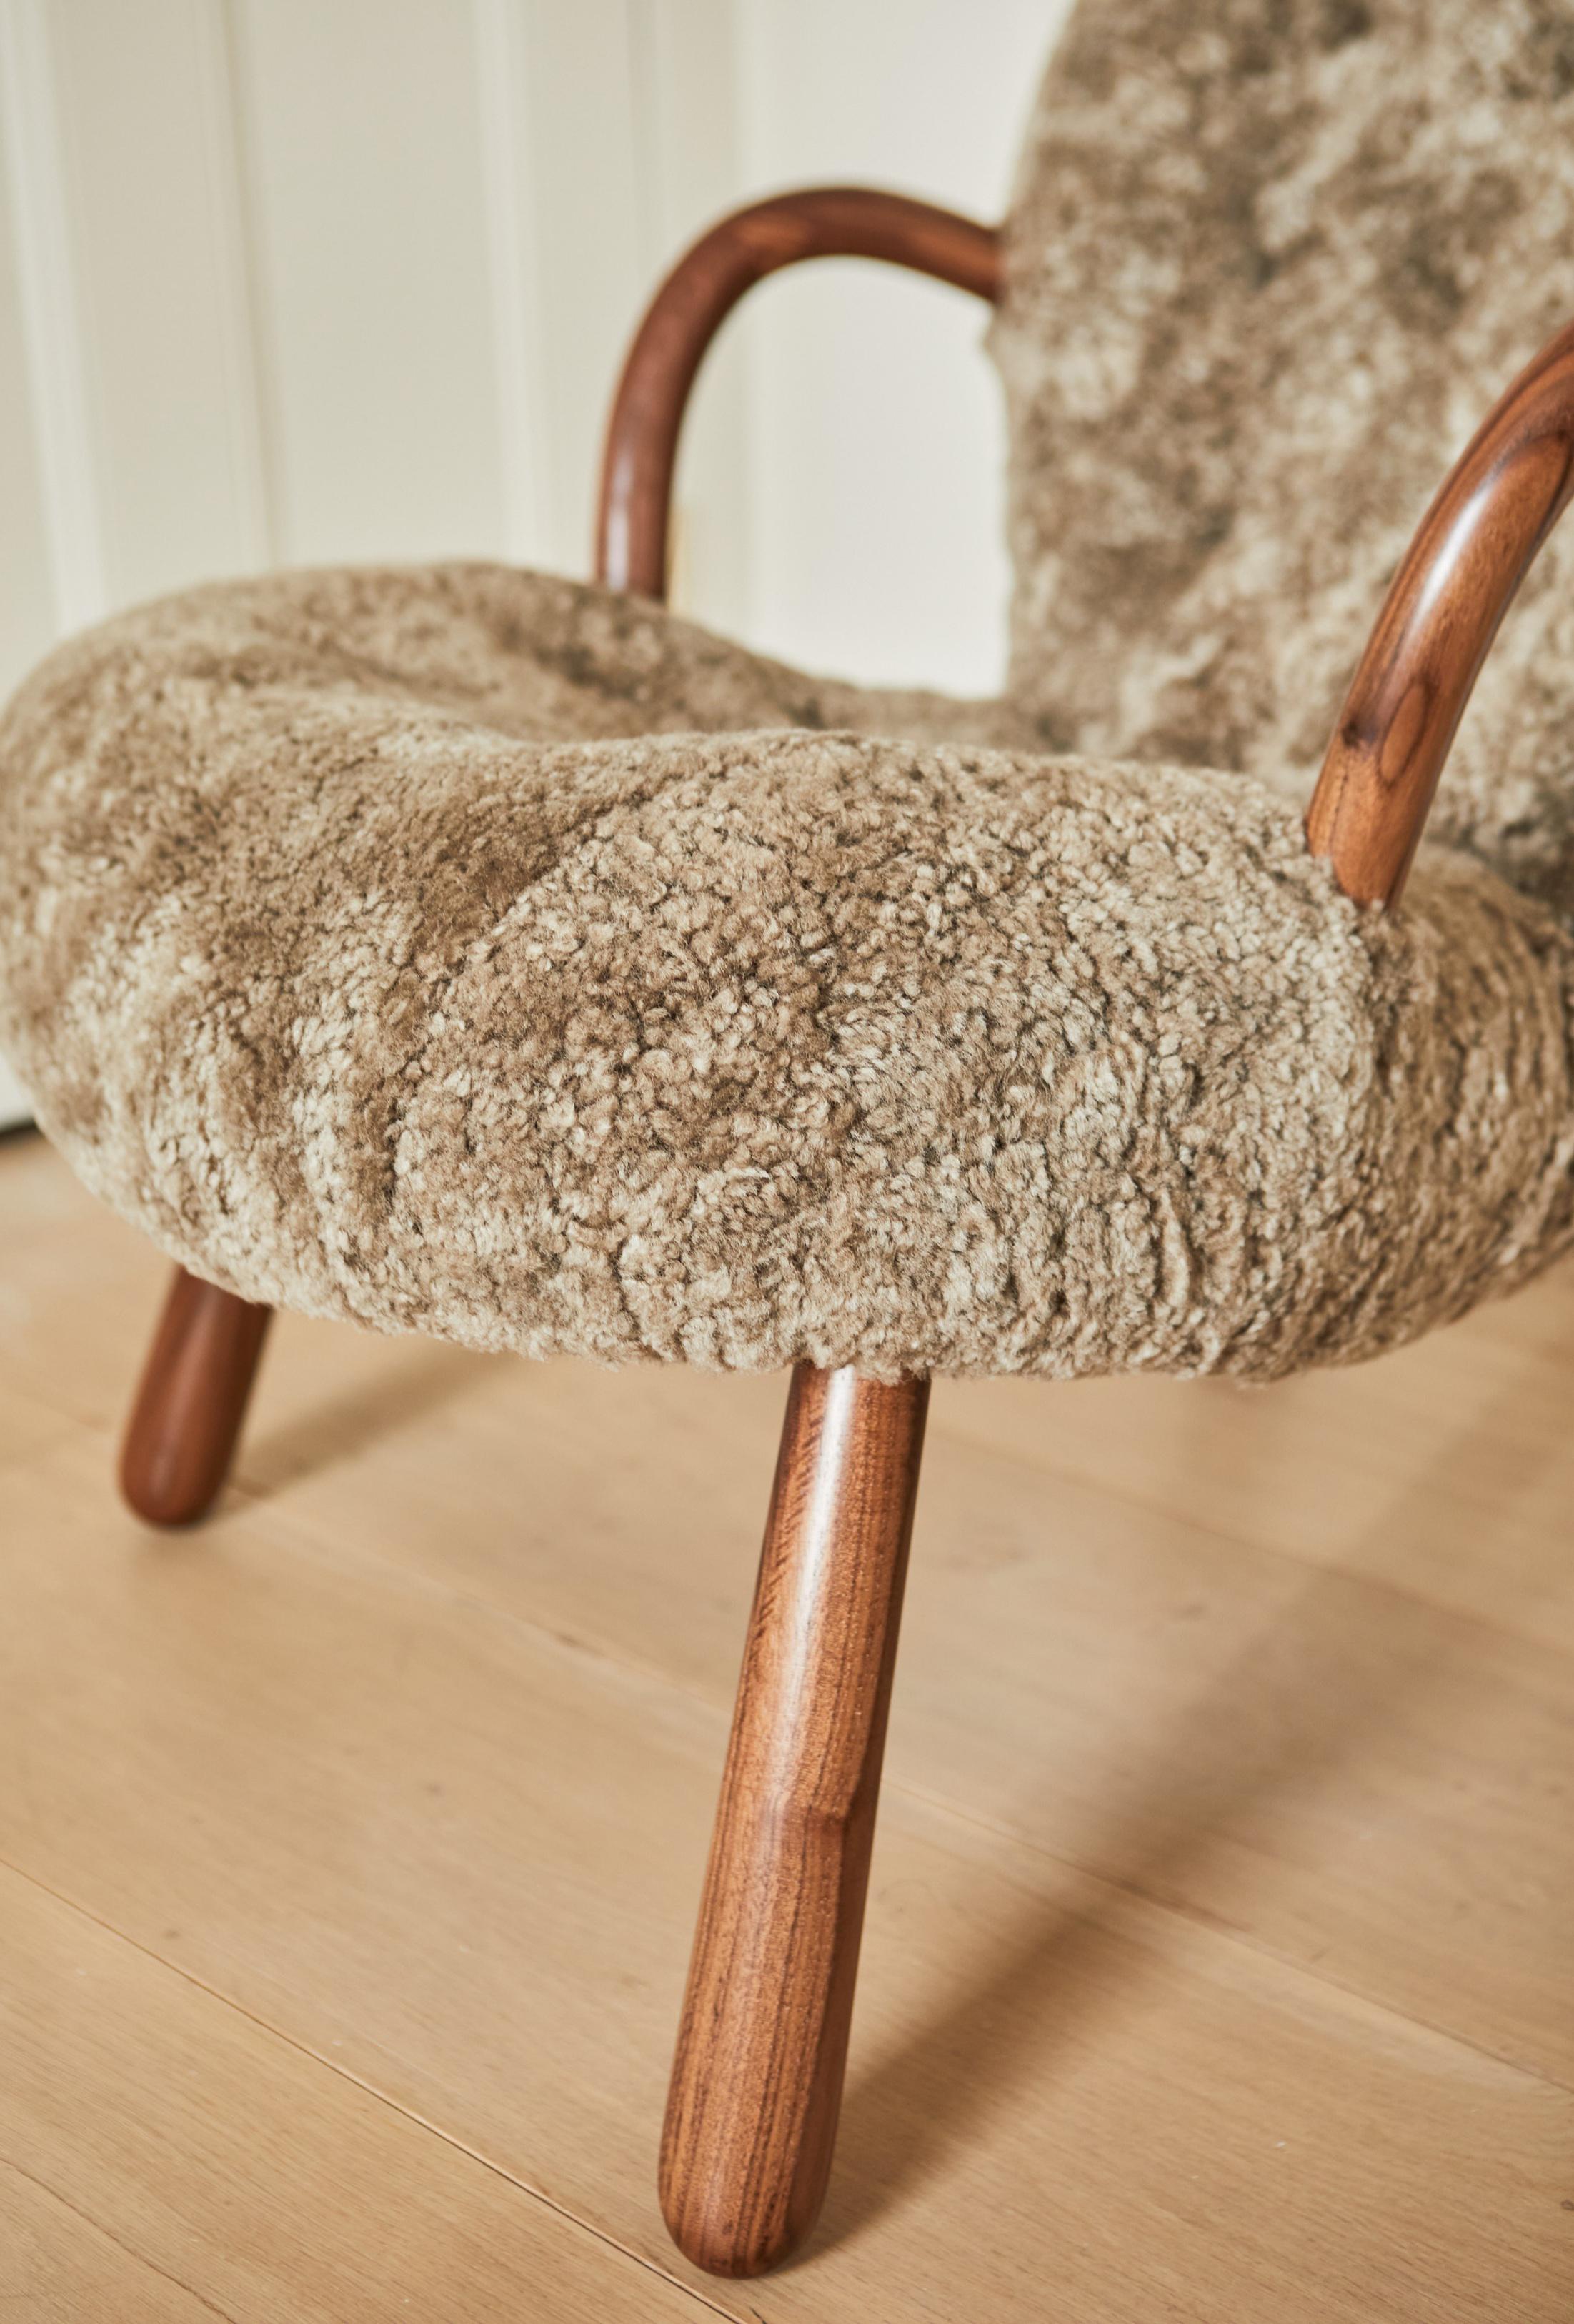 Re-Edition Sheepskin Clam Chairs by Arnold Madsen For Sale 6